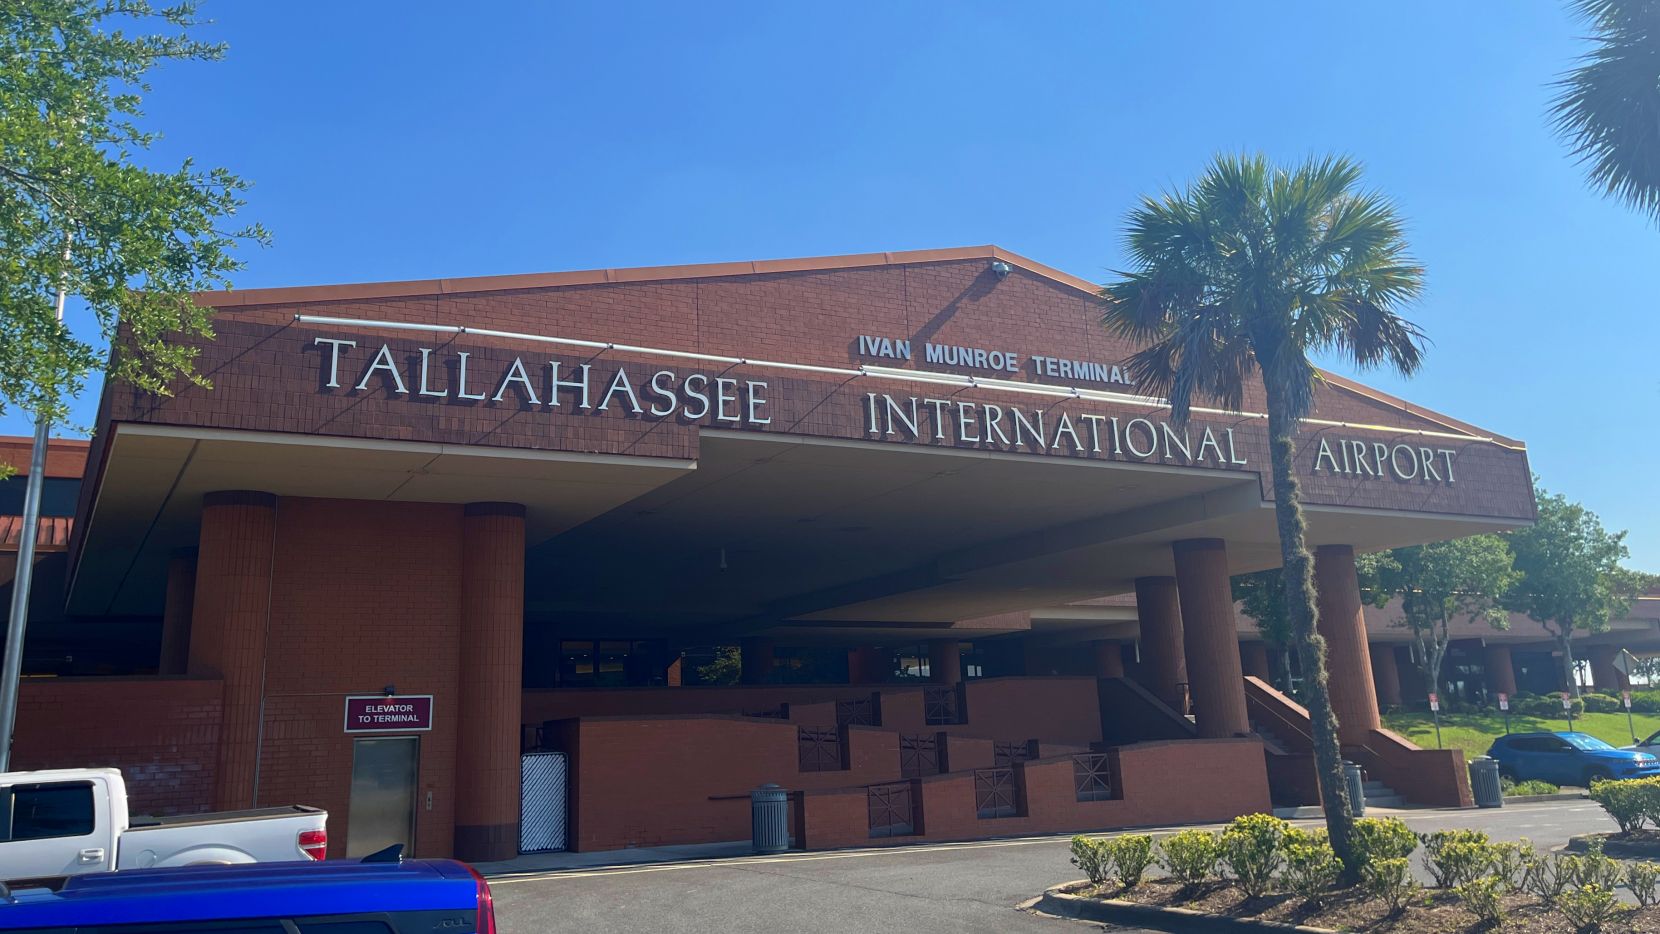 Exterior of terminal of Tallahassee International Airport, as seen from the parking lot.